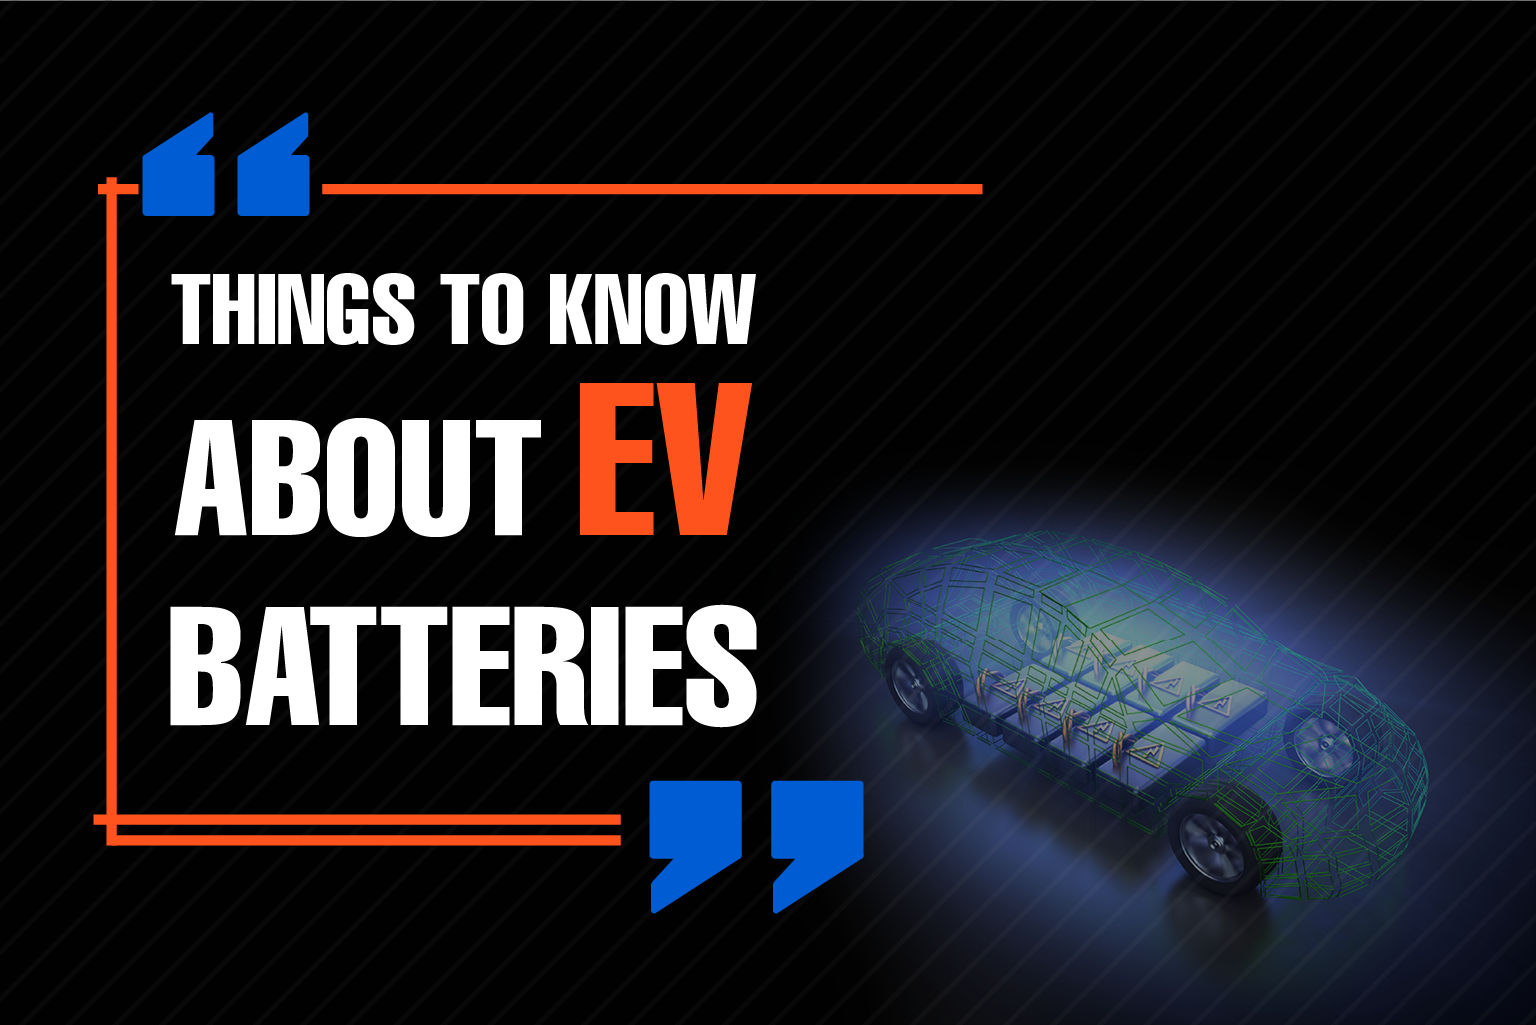 Things to know about EV batteries